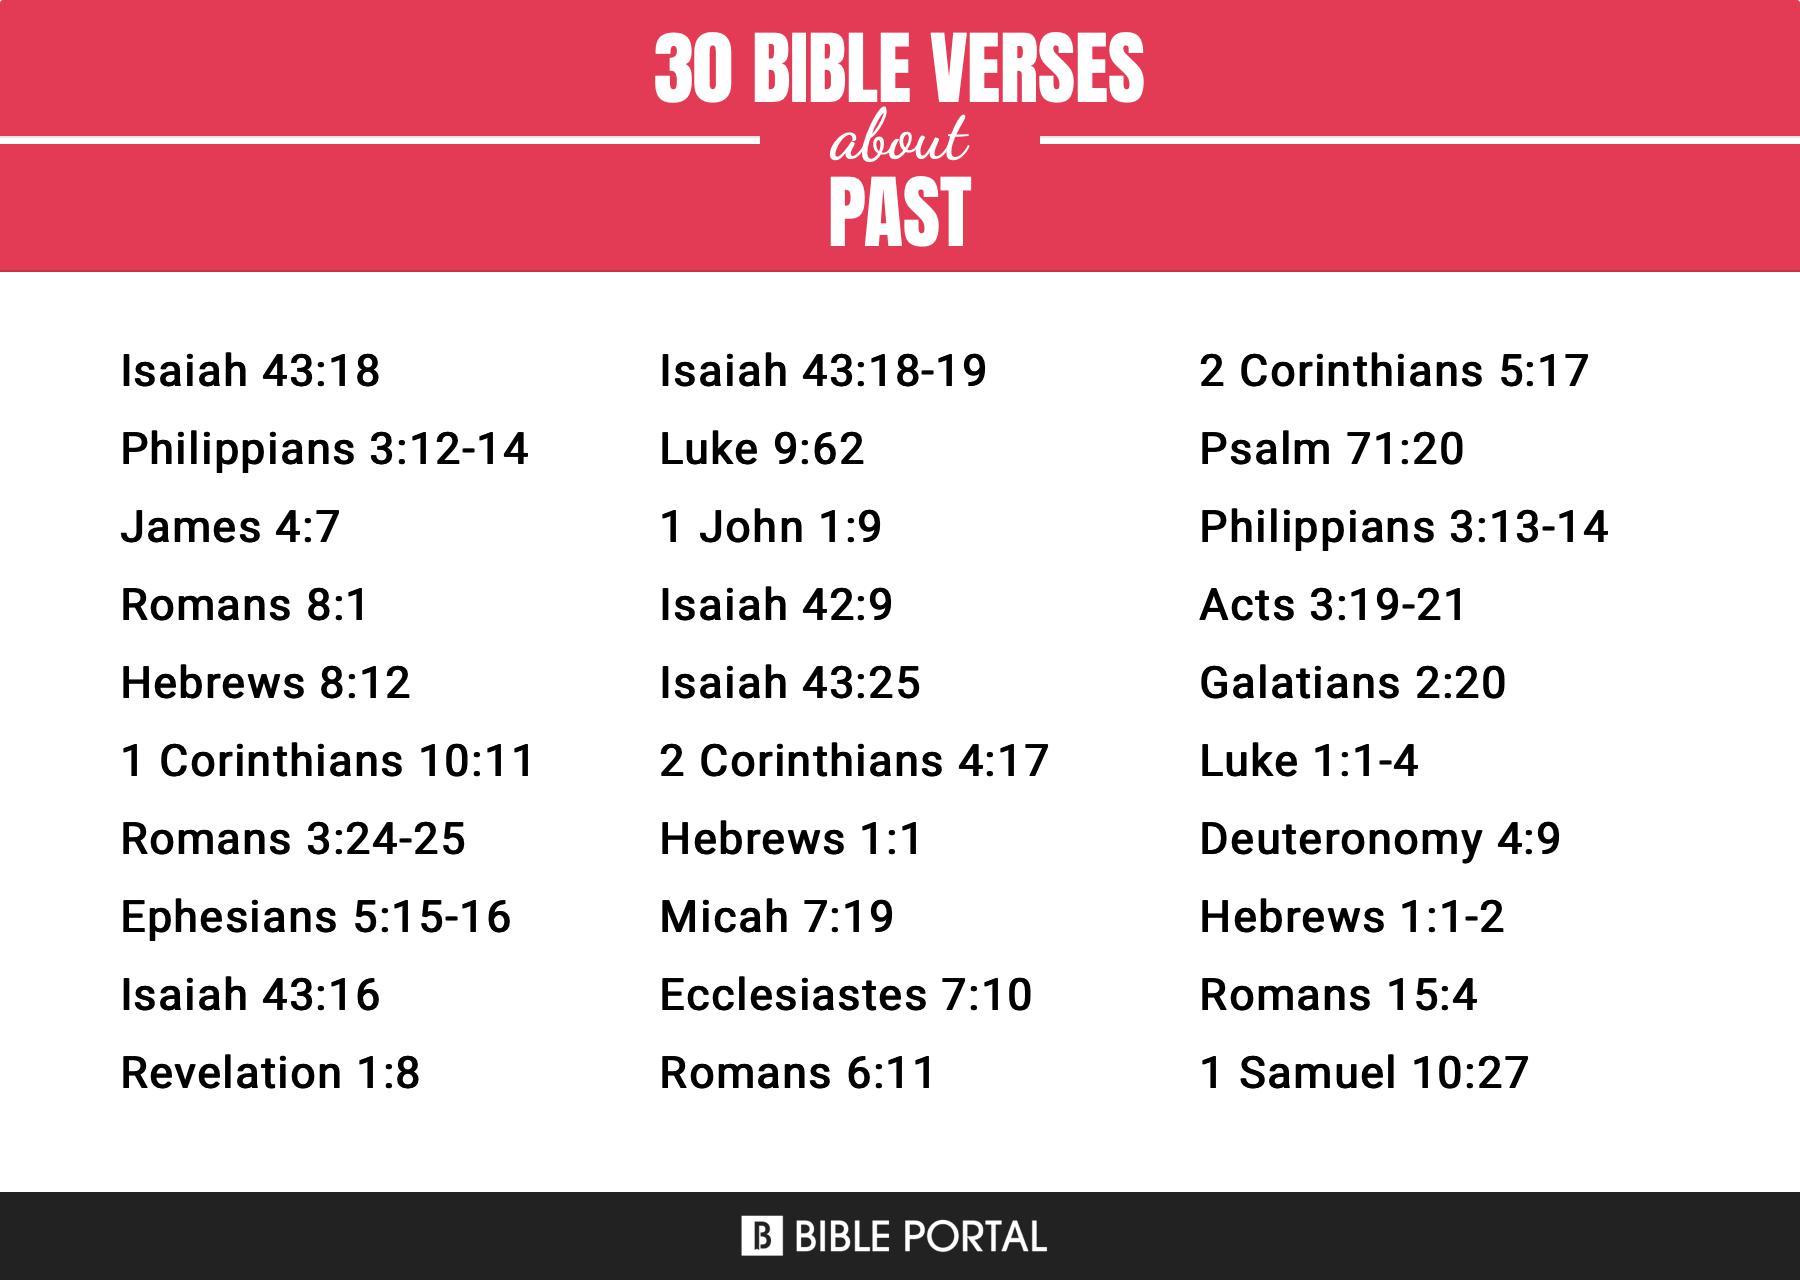 What Does the Bible Say about Past?